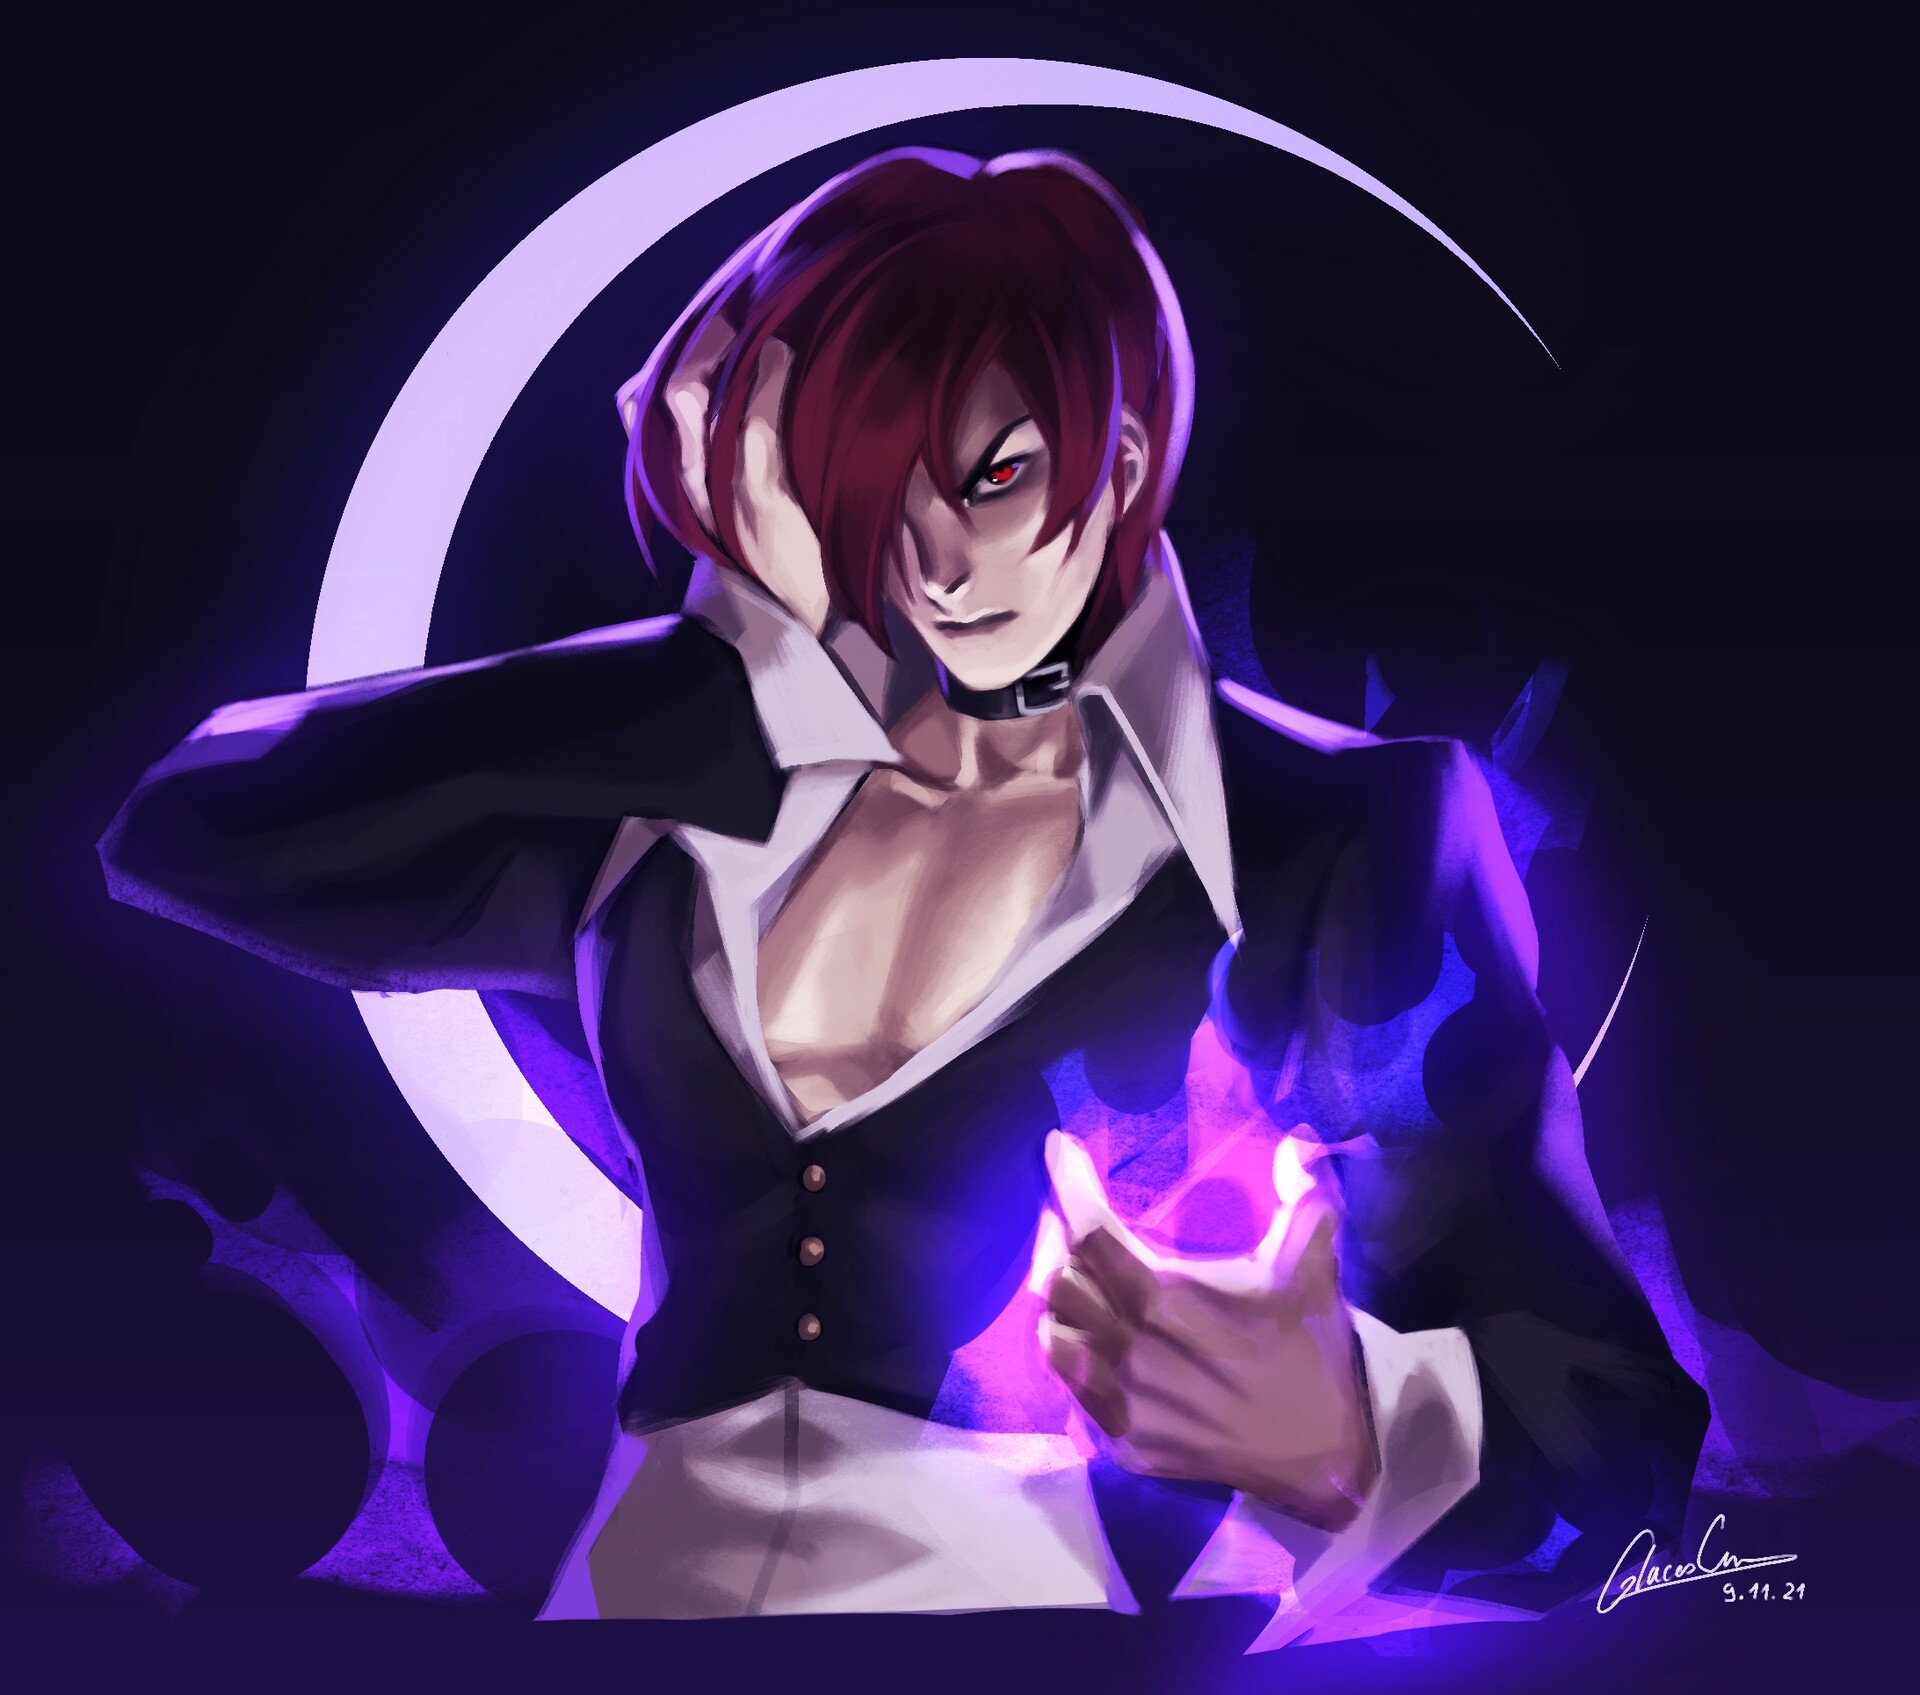 ArtStation - THE KING OF FIGHTERS IORI YAGAMI